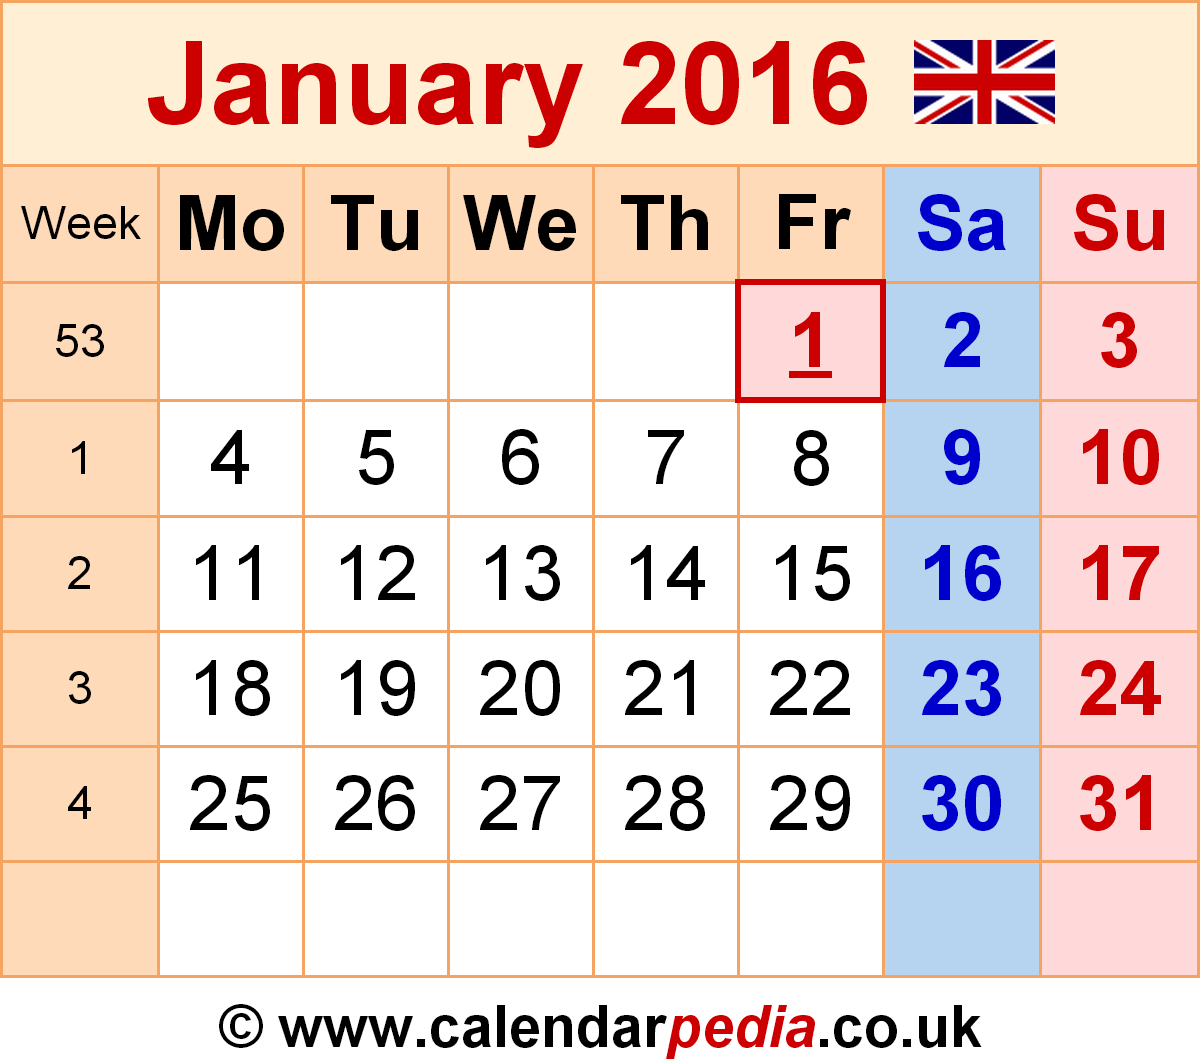 Download Calendar January 2016 As A Graphic Image File In Png Format